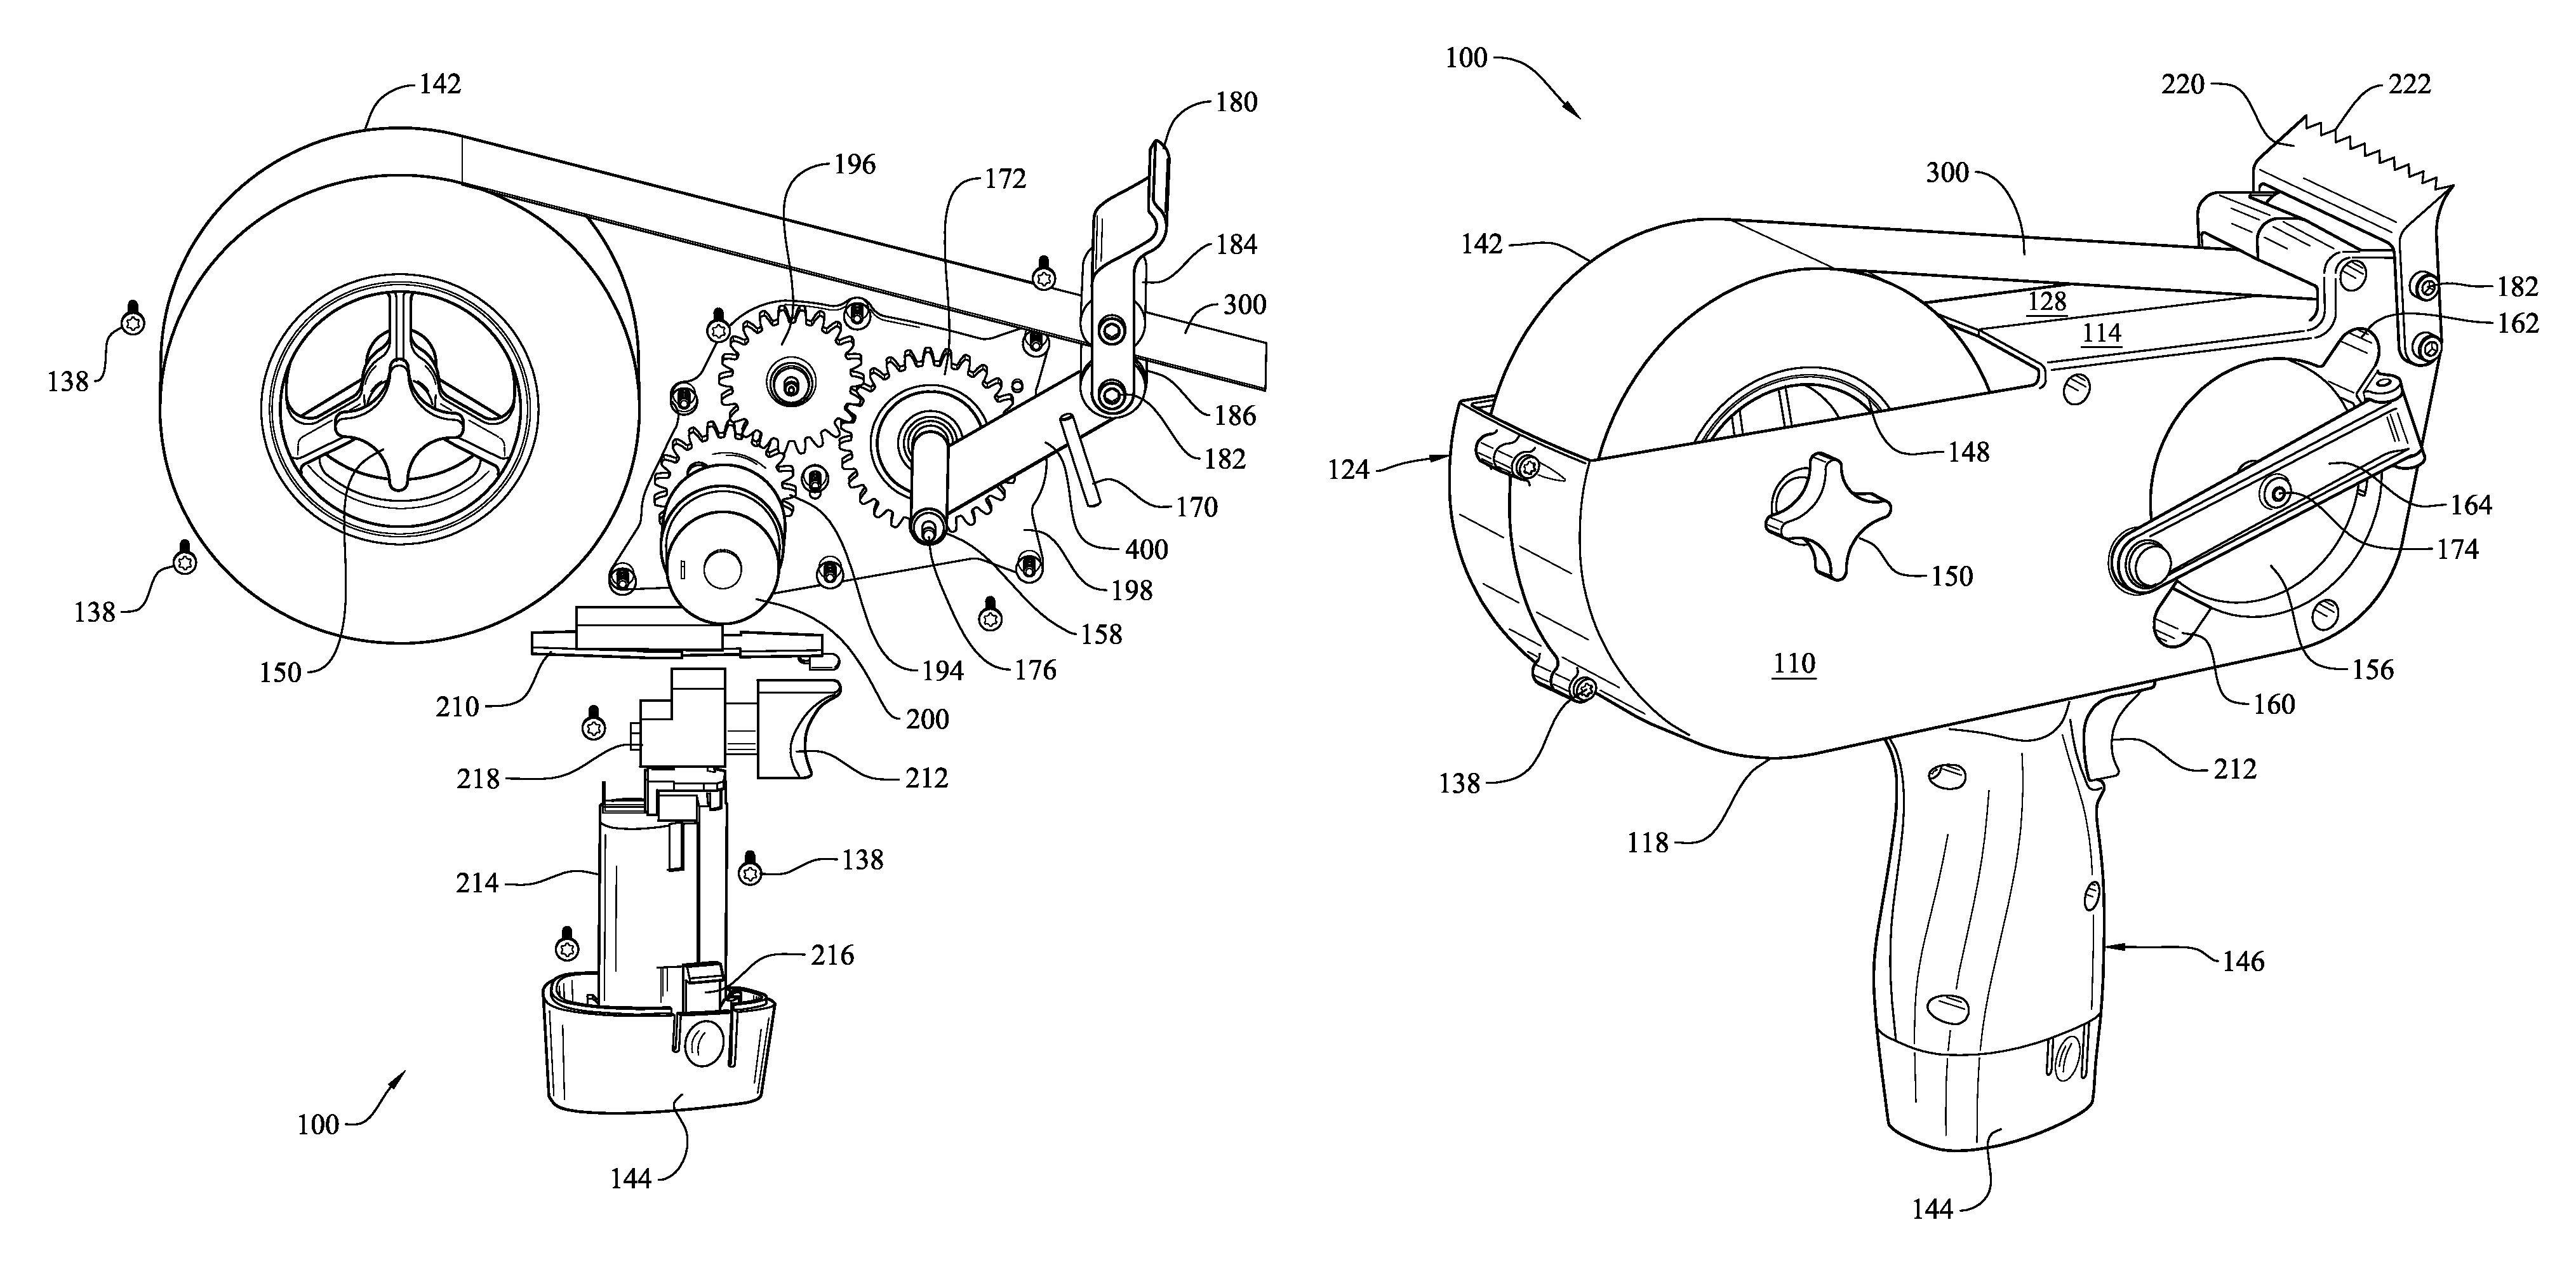 Adhesive tape dispenser with automatic winding of releasable backing